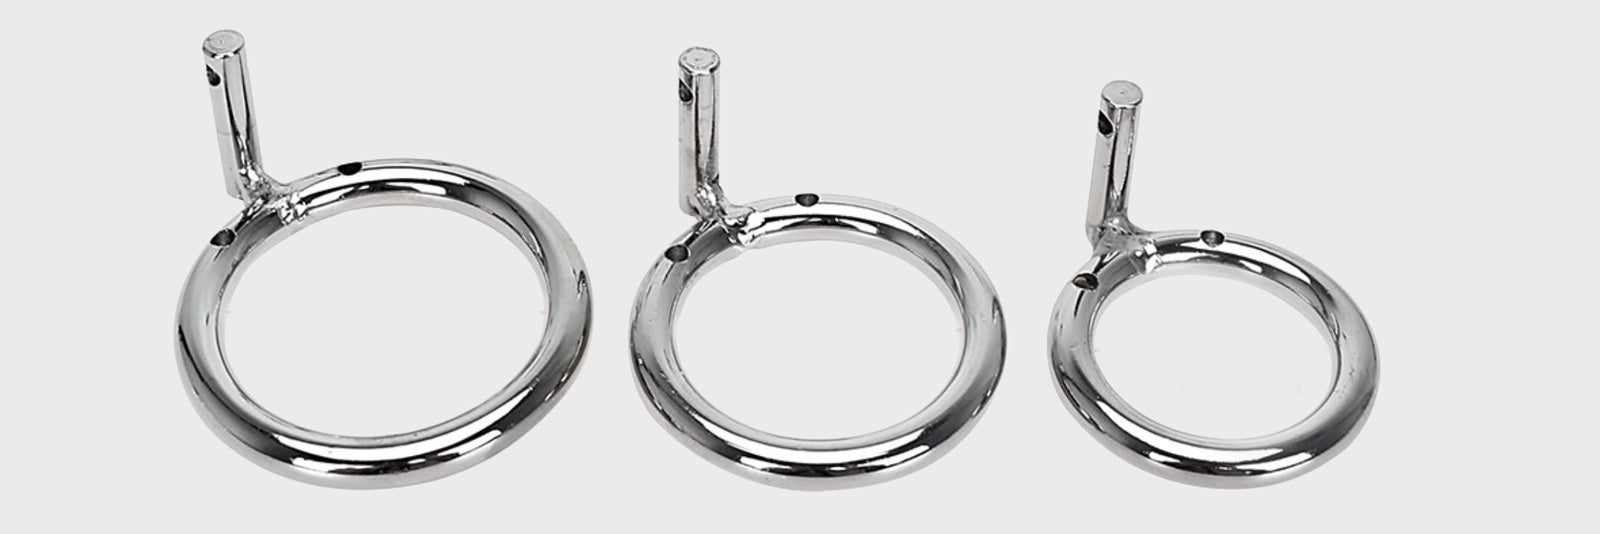 Steel rings that are used for male chastity cages.  These rings are different sizes to make sure they fit everyone.